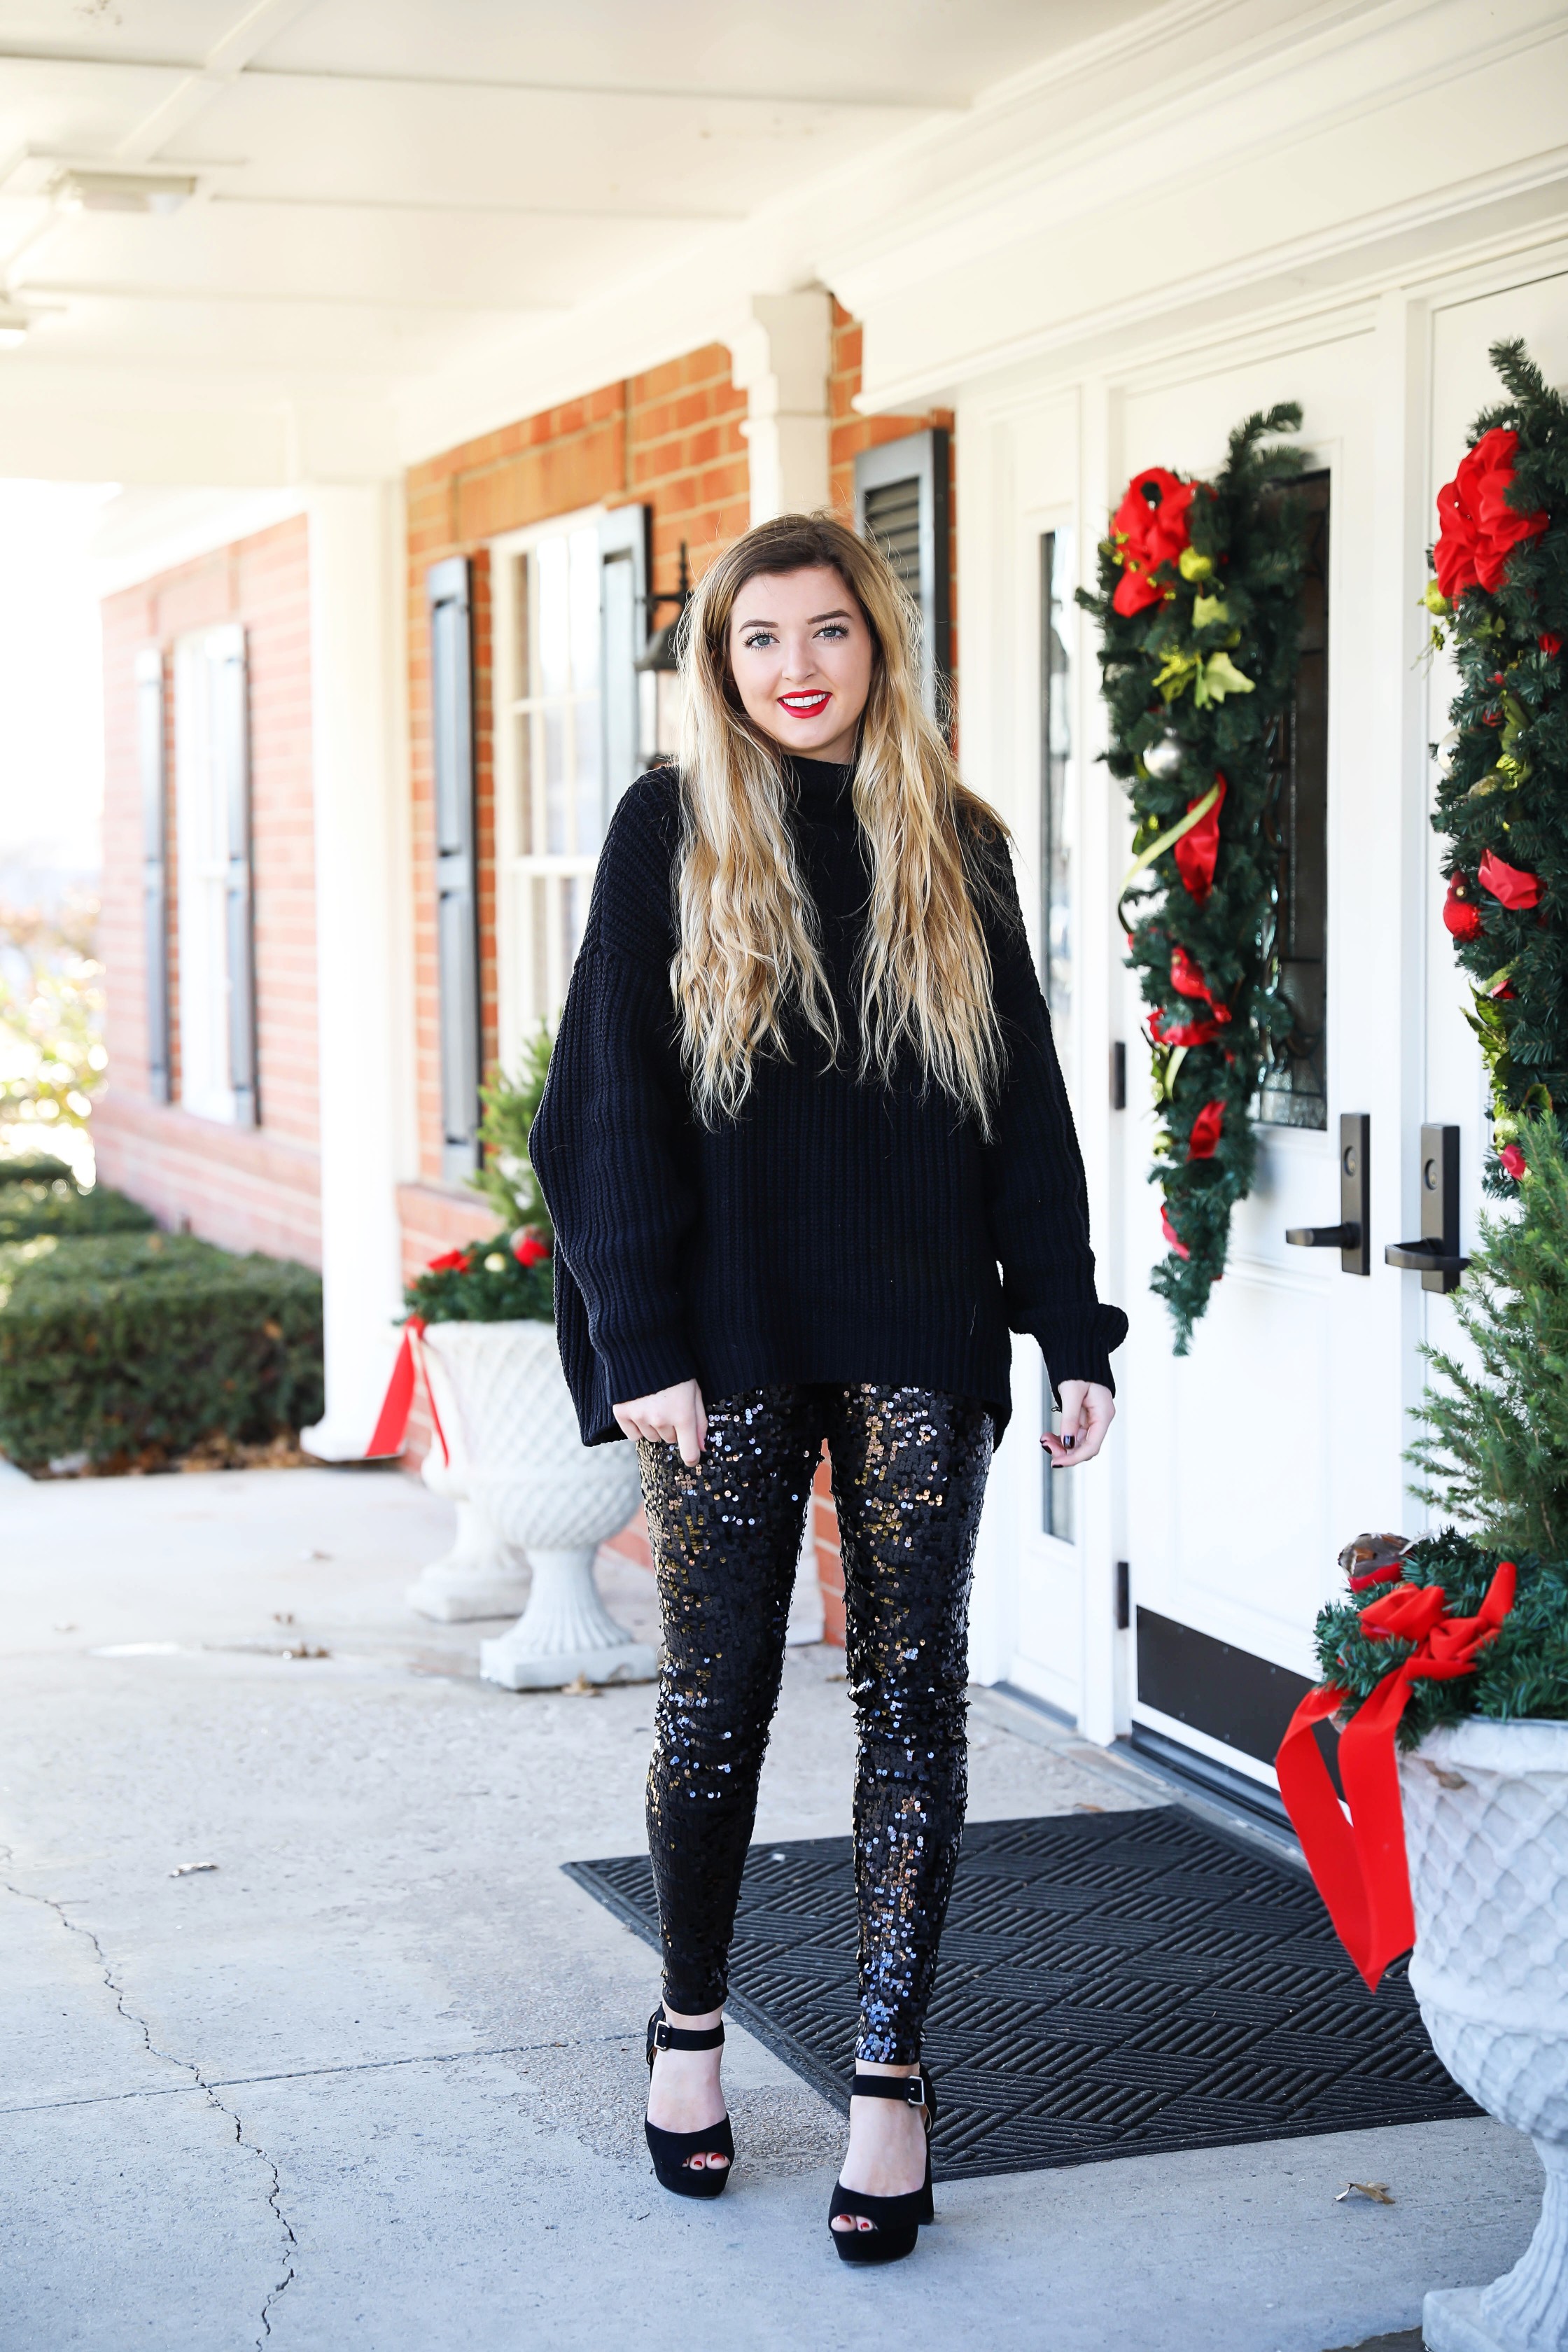 New Years eve outfit idea! Sequin pants and a black sweater